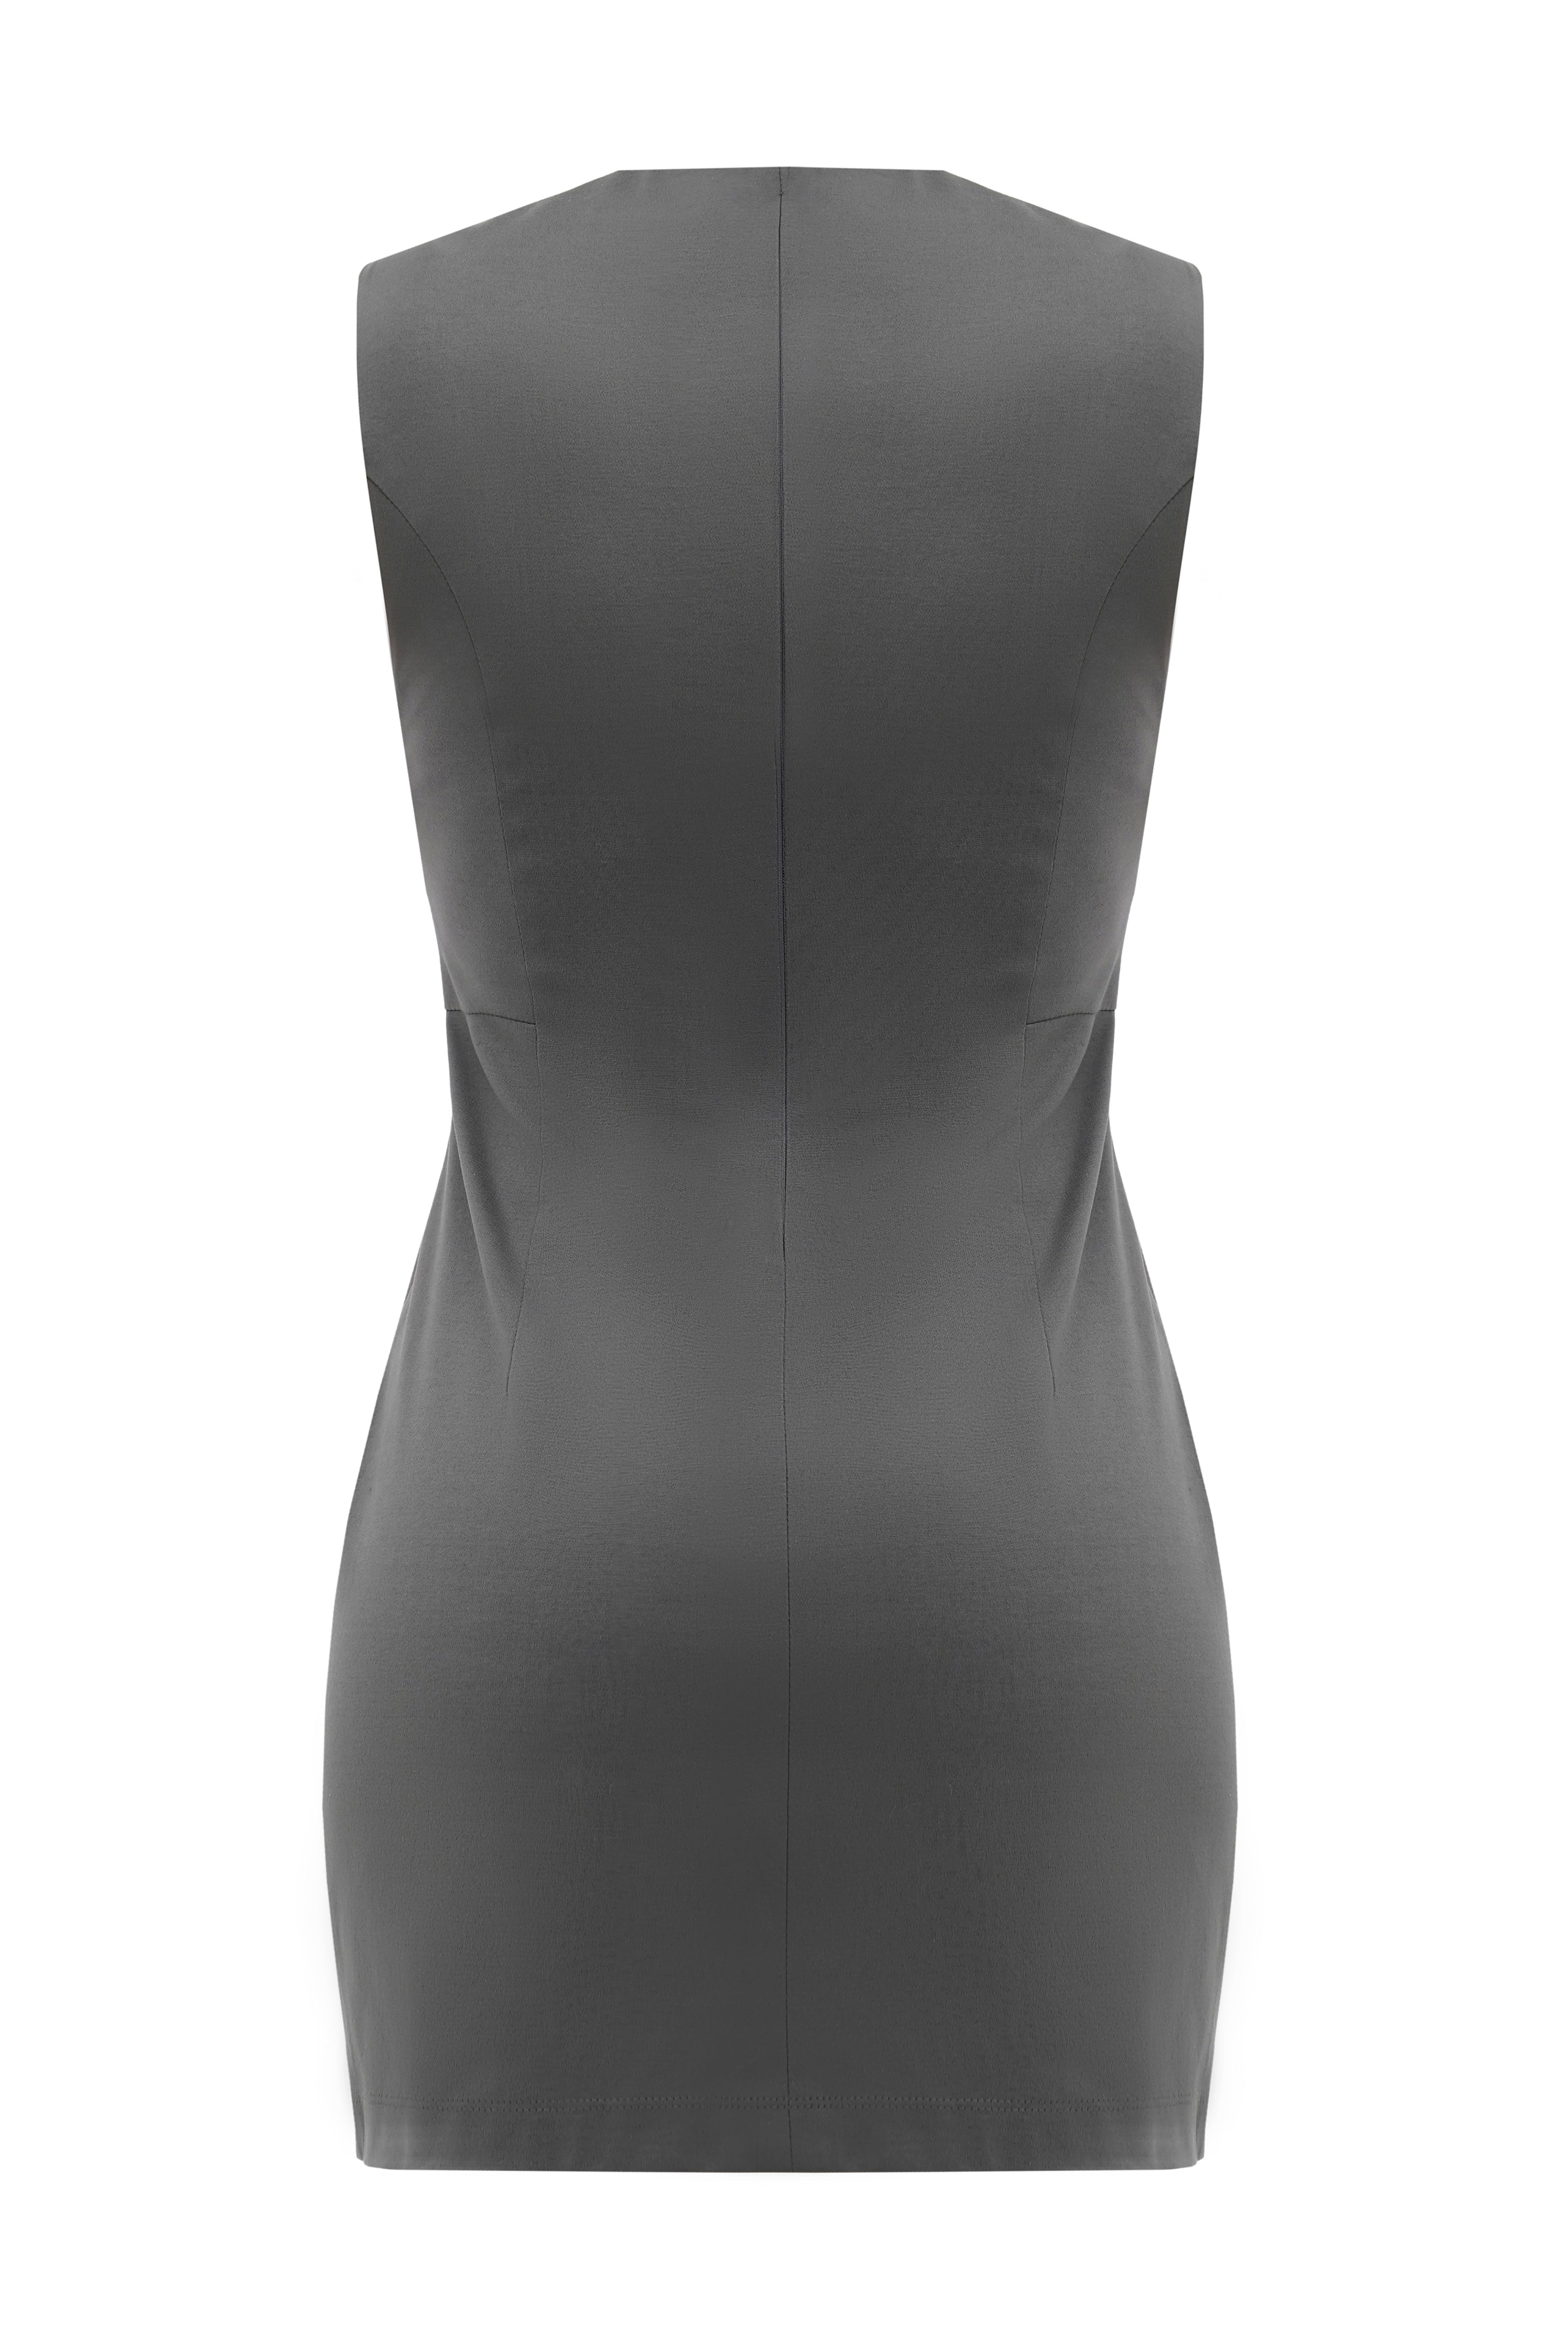 A back of a grey mini dress with a invisible zipper in the middle